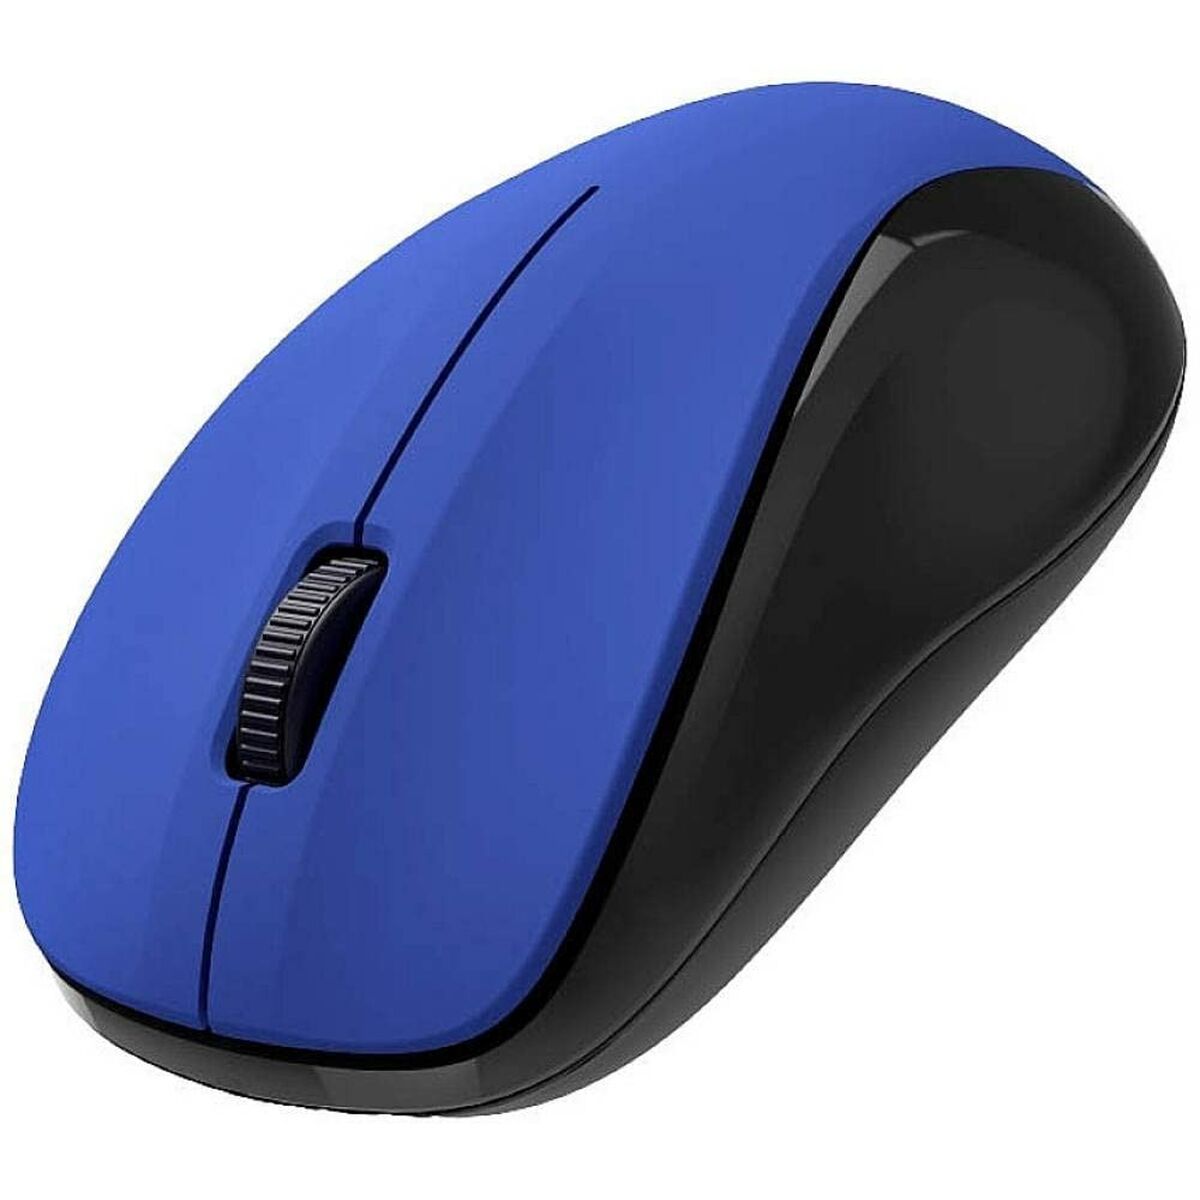 Optical Wireless Mouse Hama MW-300 V2 Blue Black/Blue (1 Unit), Hama, Computing, Accessories, optical-wireless-mouse-hama-mw-300-v2-blue-black-blue-1-unit, Brand_Hama, category-reference-2609, category-reference-2642, category-reference-2656, category-reference-t-19685, category-reference-t-19908, category-reference-t-21353, computers / peripherals, Condition_NEW, office, Price_20 - 50, Teleworking, RiotNook